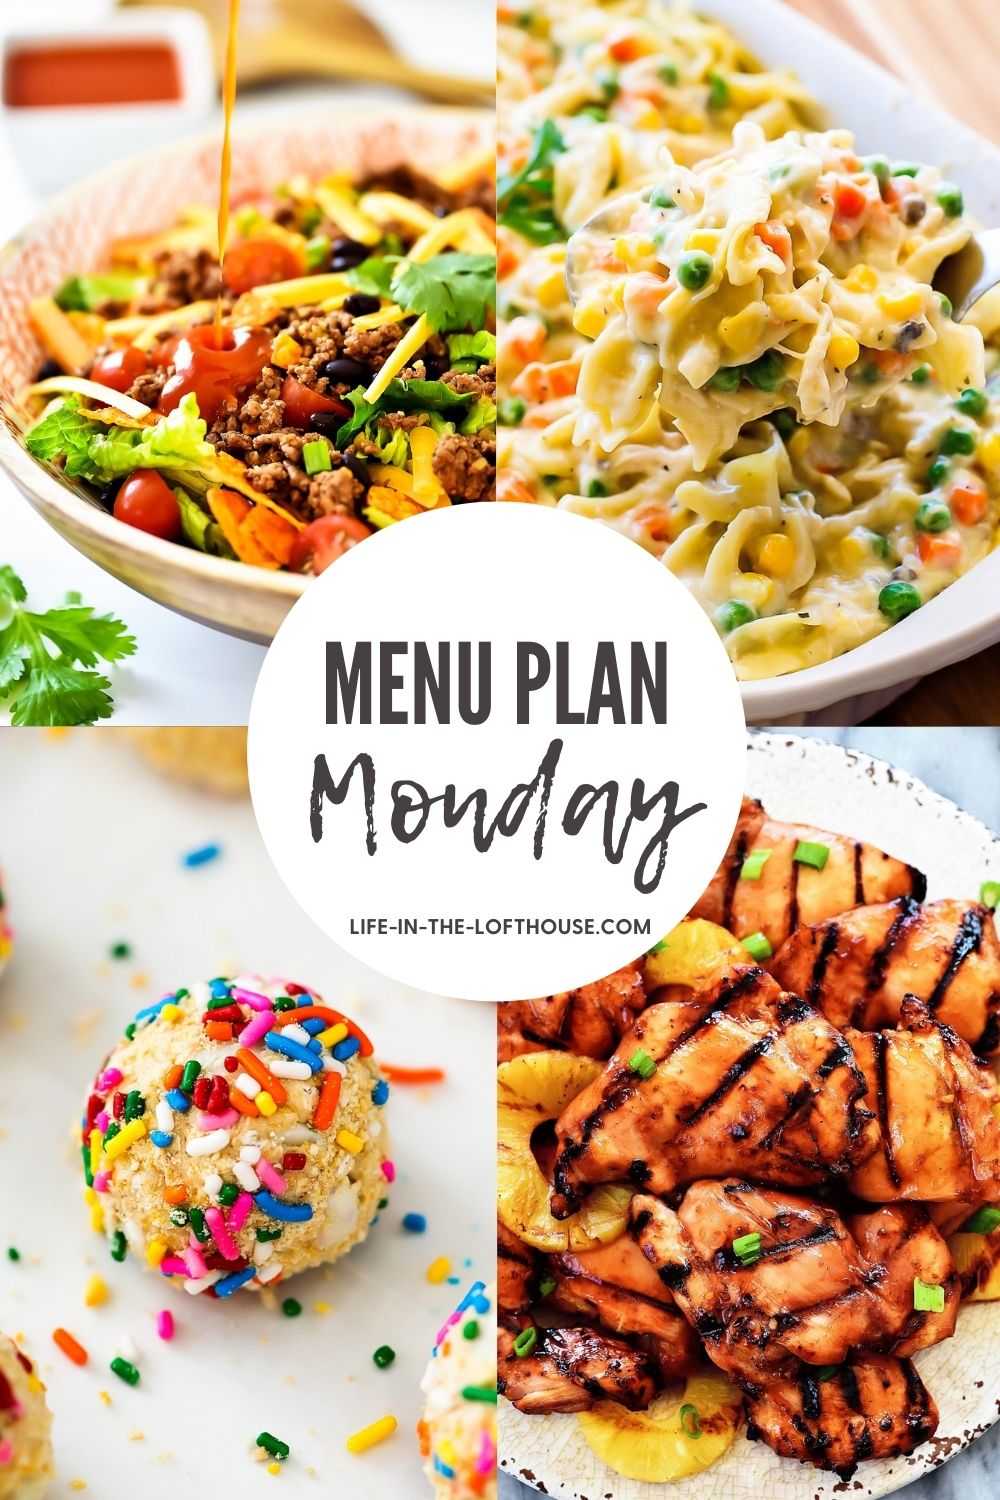 Menu Plan Monday is a list of family-friendly meals that are great for busy weeknights.